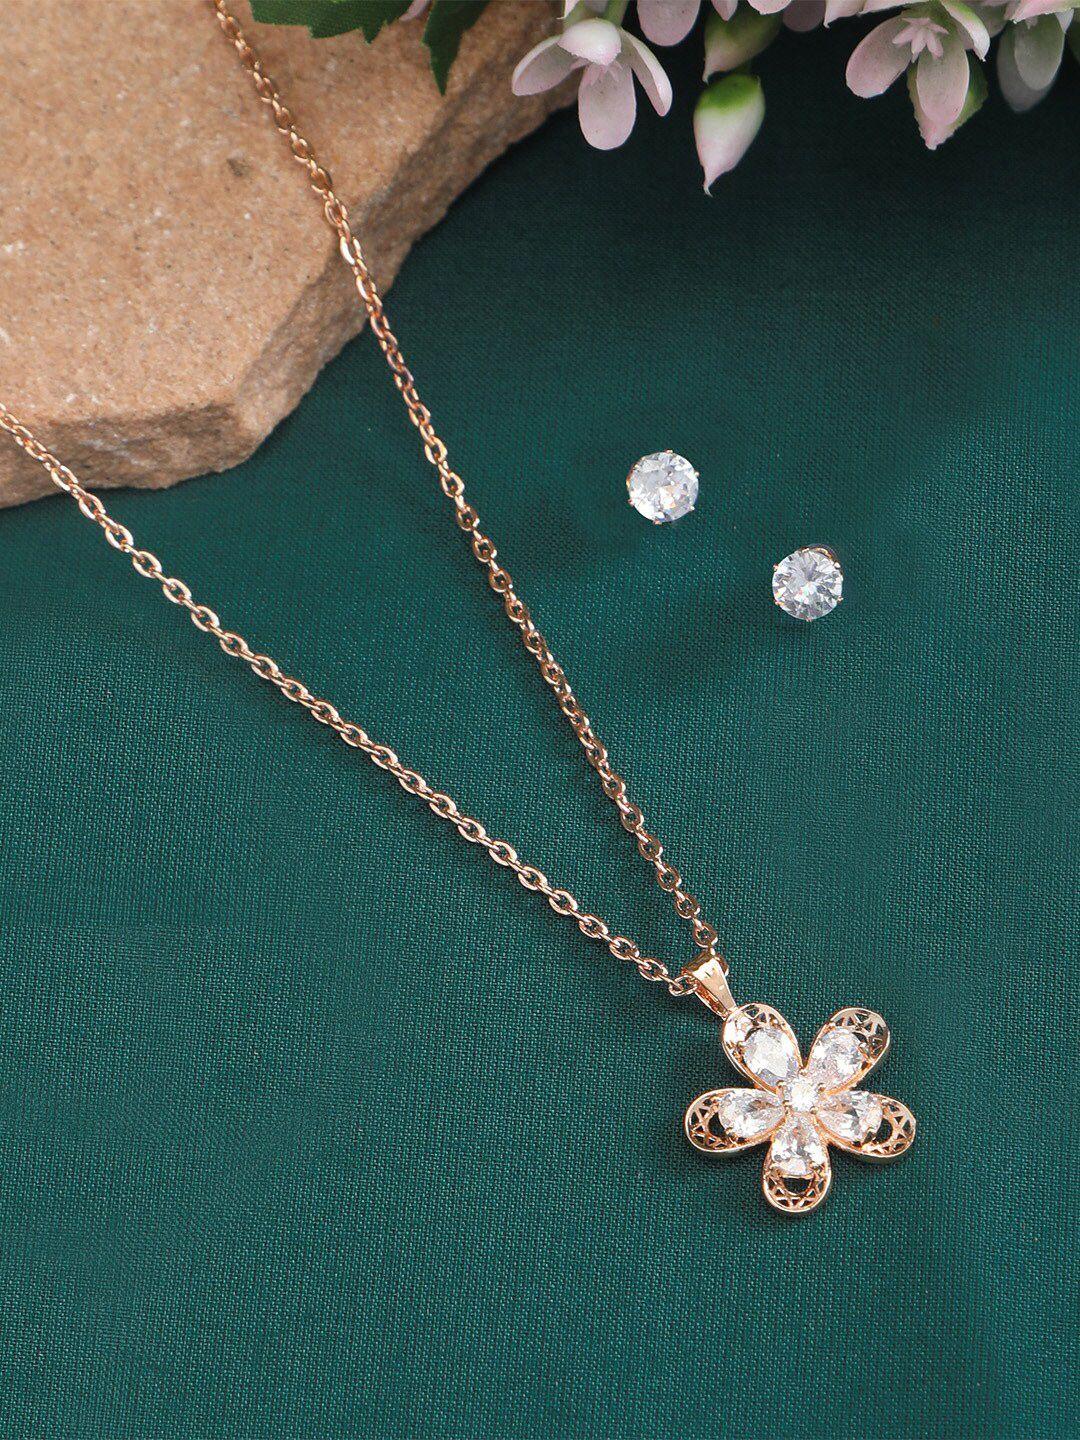 zinu white cubic zirconia studded rose gold-plated necklace with pendant and earrings.